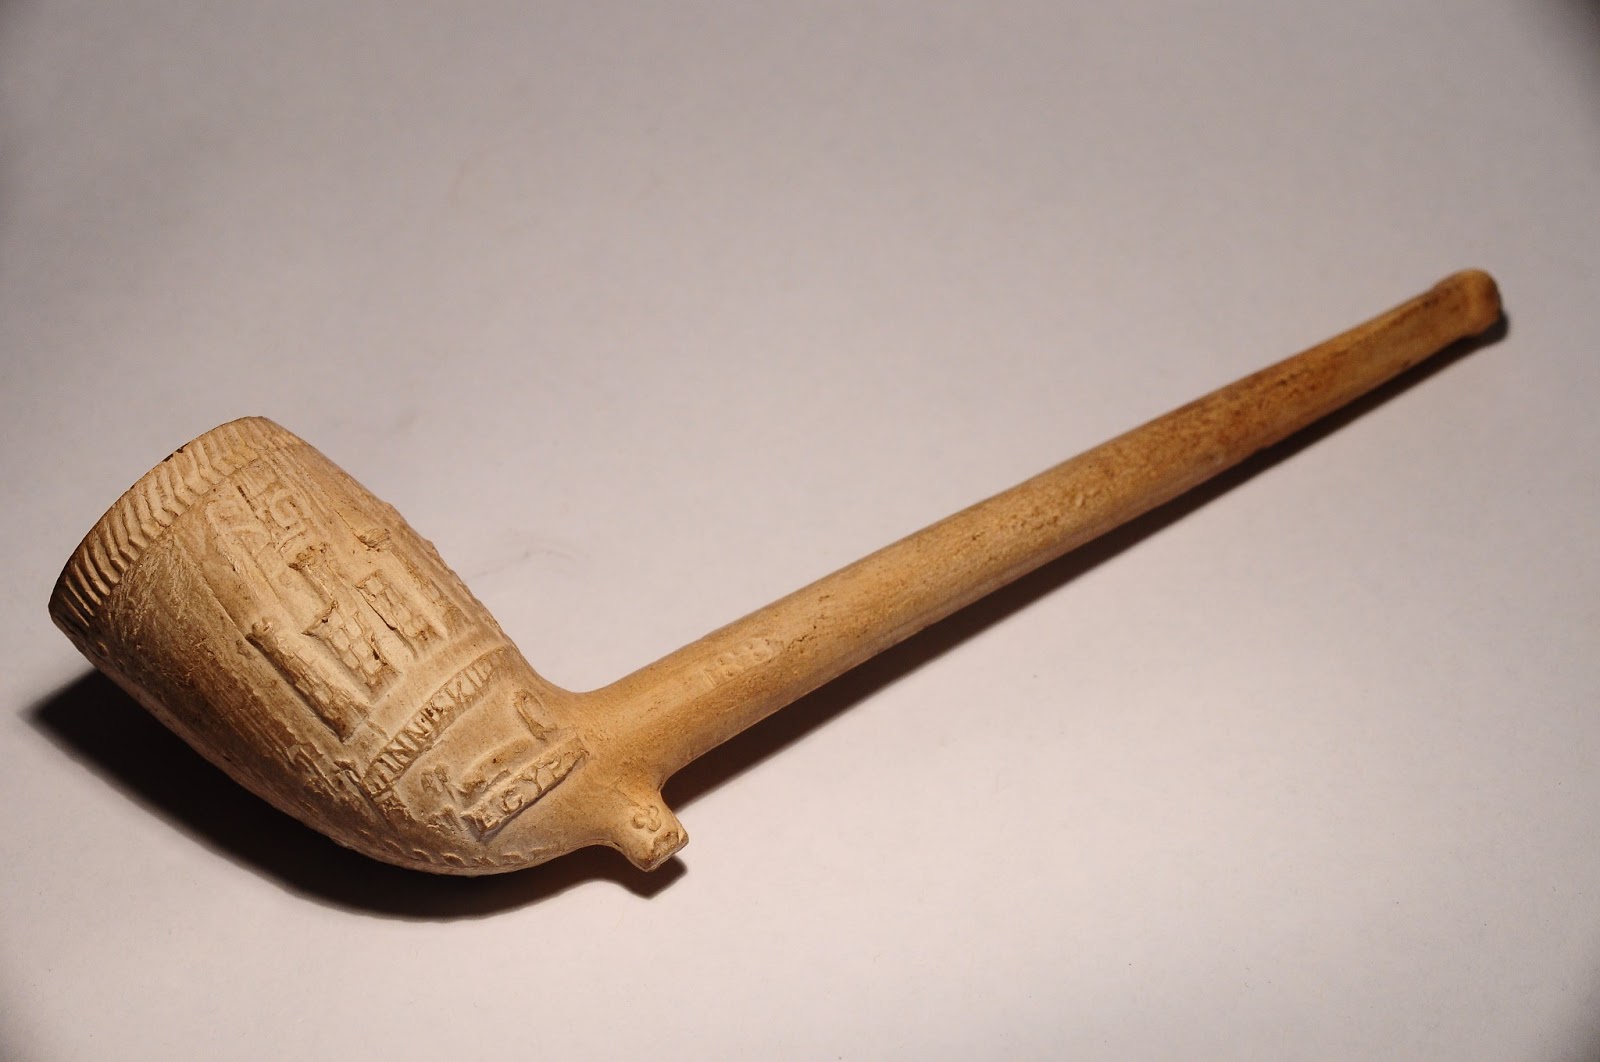 Hobo Pipes: An old military clay